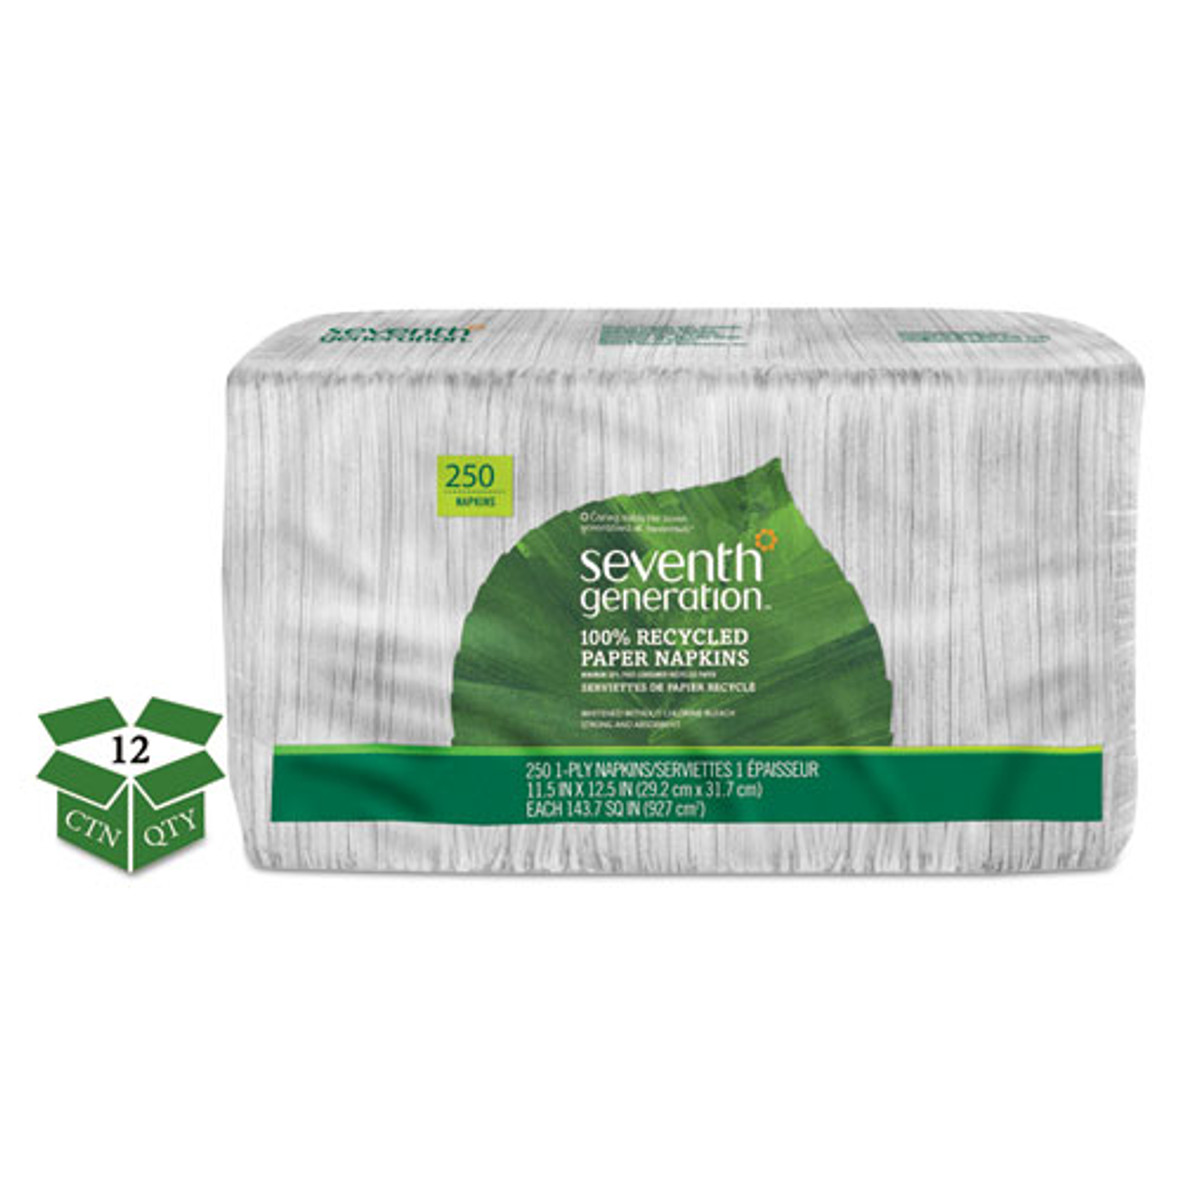 Seventh Generation® 100% Recycled Napkins, 1-ply, 11 1/2 x 12 1/2, White, 250/Pack, 12 Packs/Carton